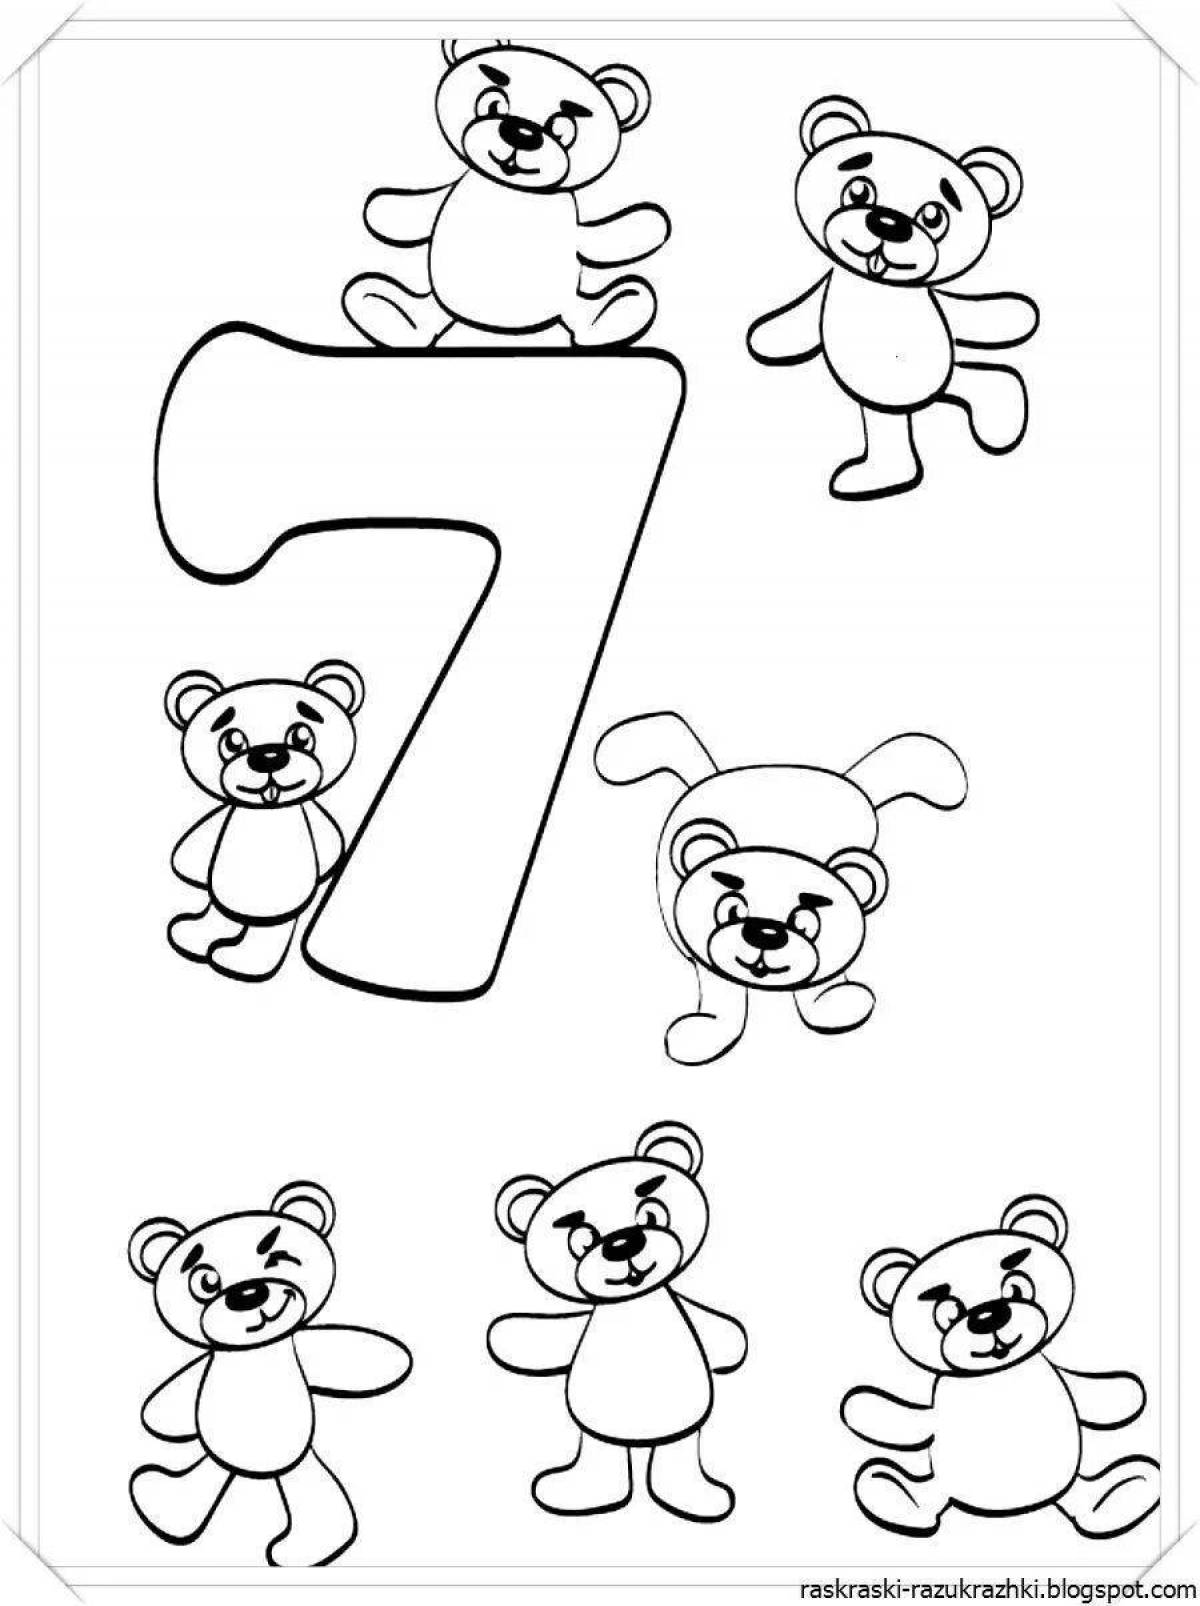 Colorful number 7 coloring book for preschoolers